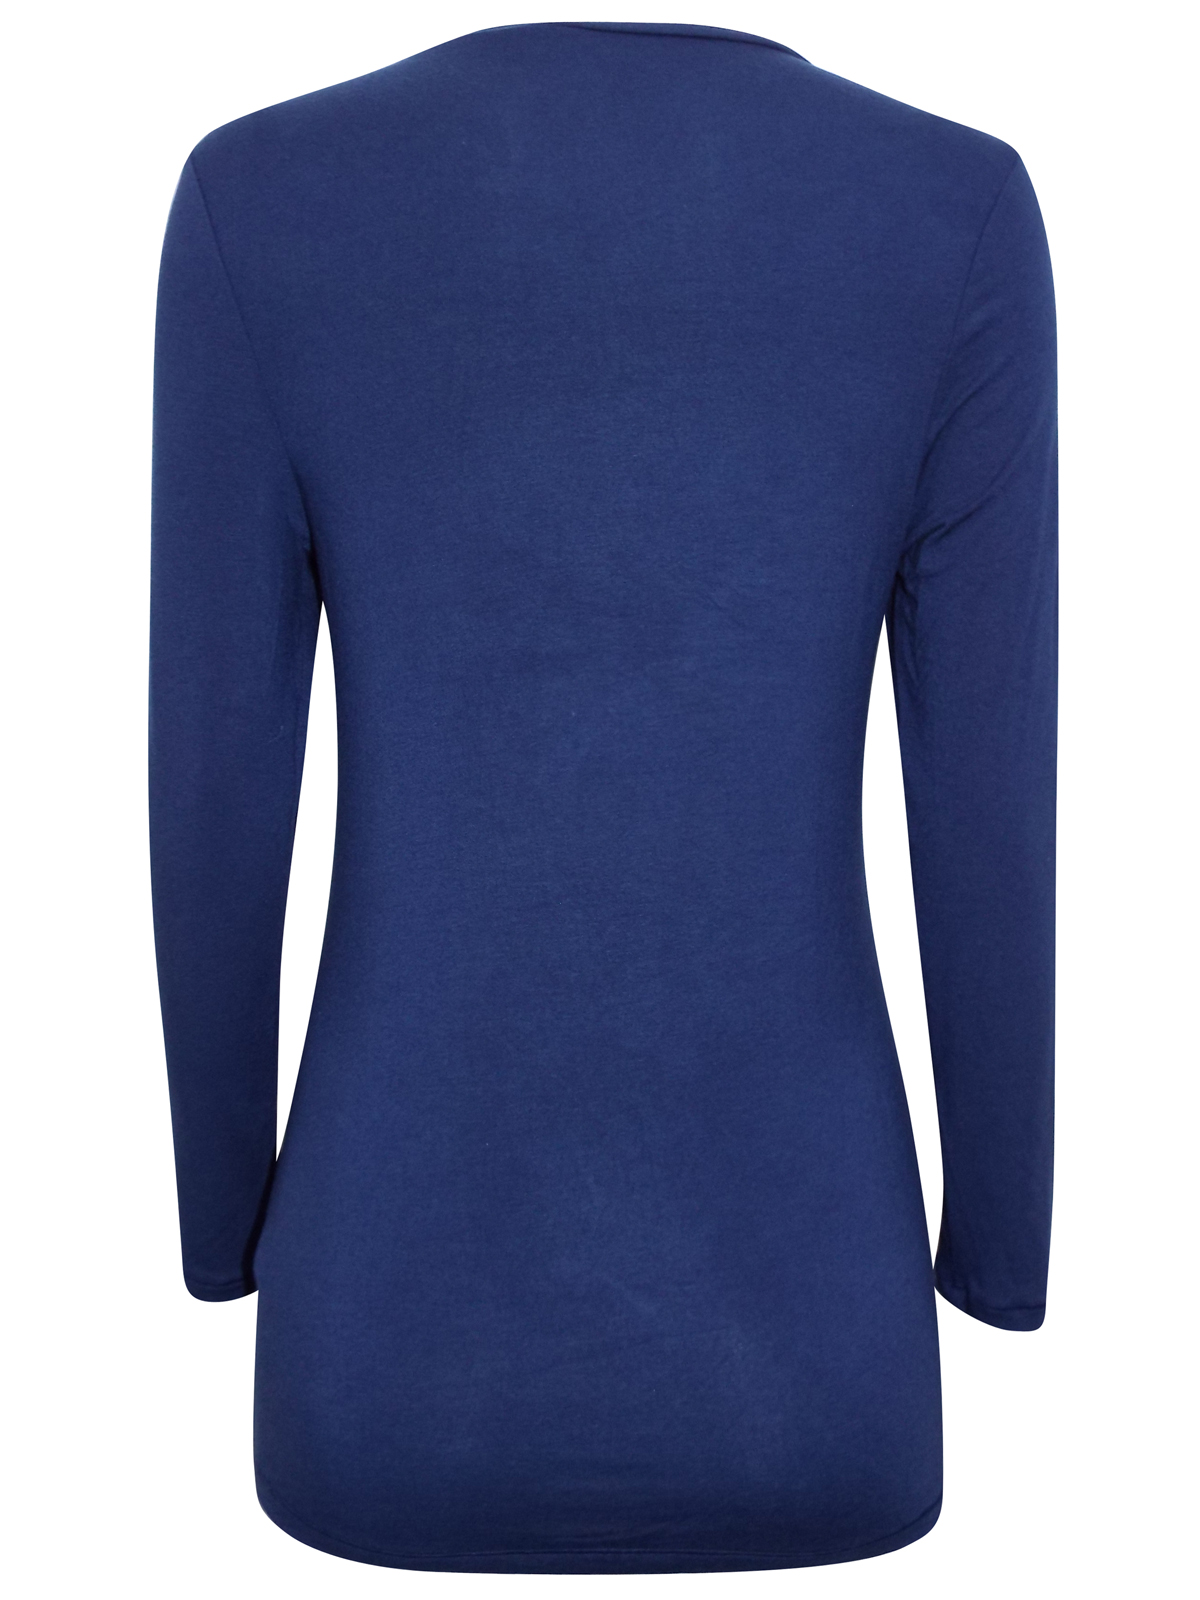 George - - NAVY Thermal Long Sleeve Top - Size 12 to 14